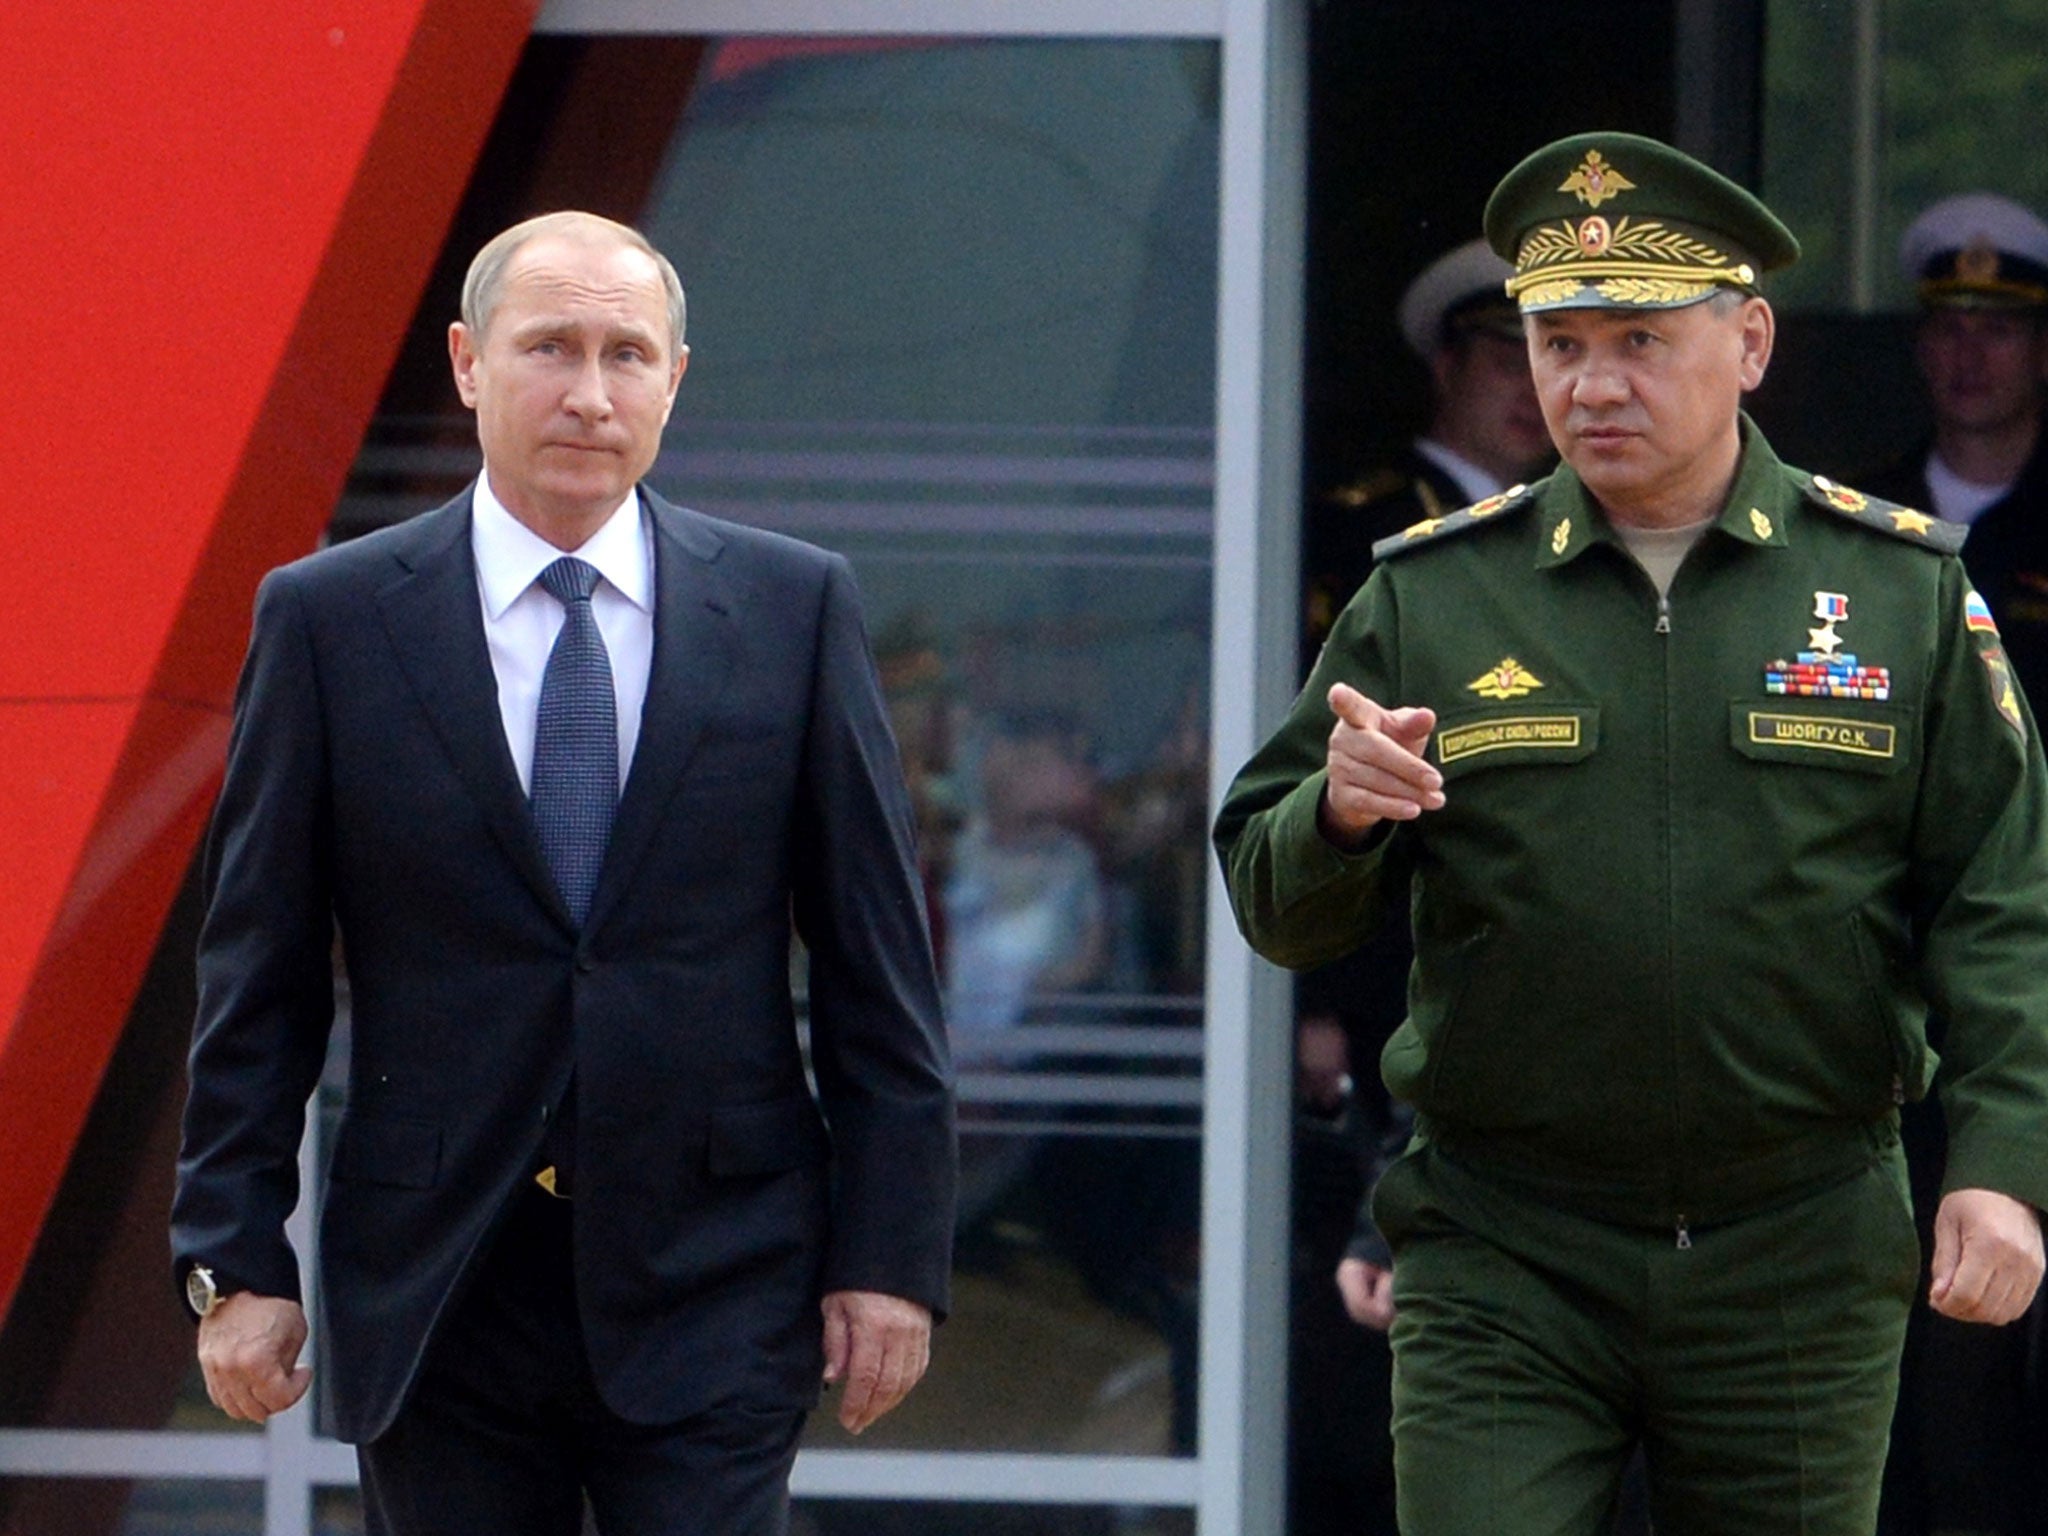 Vladimir Putin and Defence Minister Sergei Shoigu arrive for the opening of the Army-2015 international military forum in Kubinka, outside Moscow 